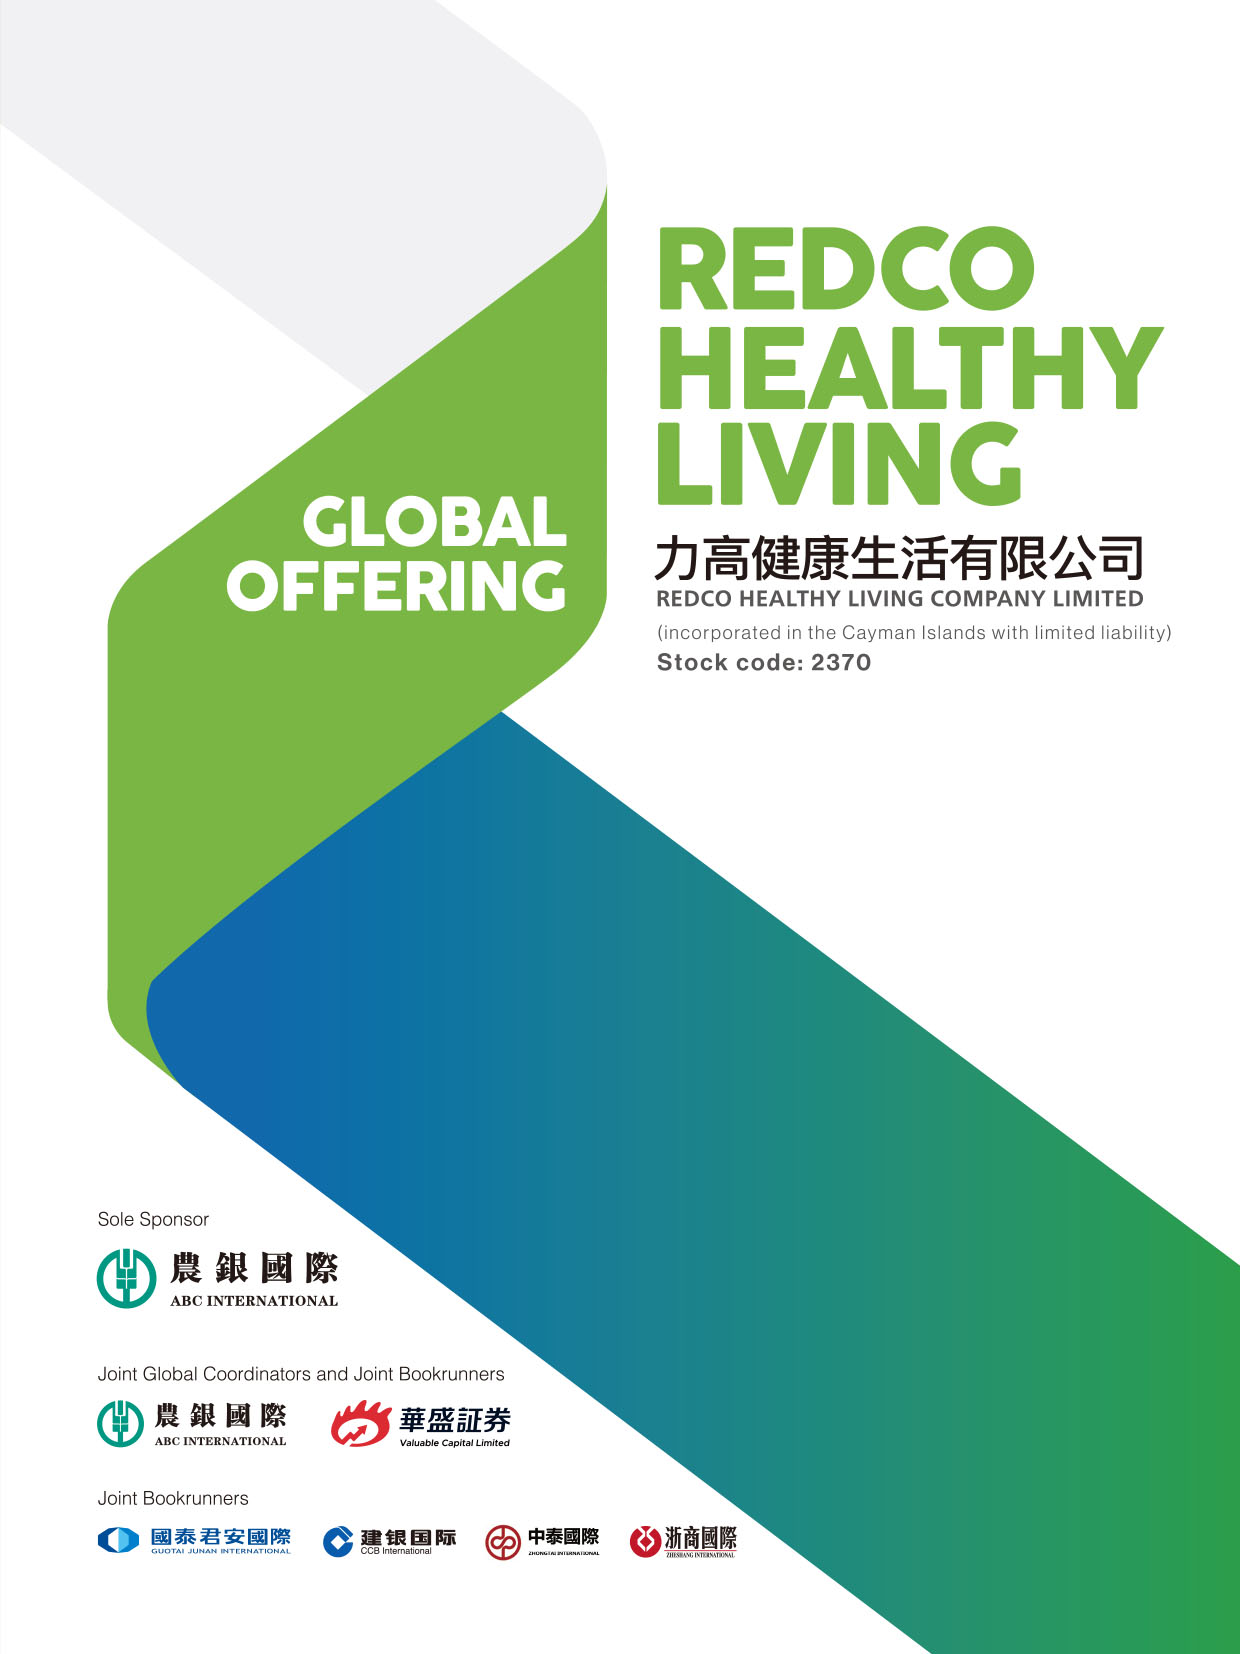 REDCO HEALTHY LIVING COMPANY LIMITED